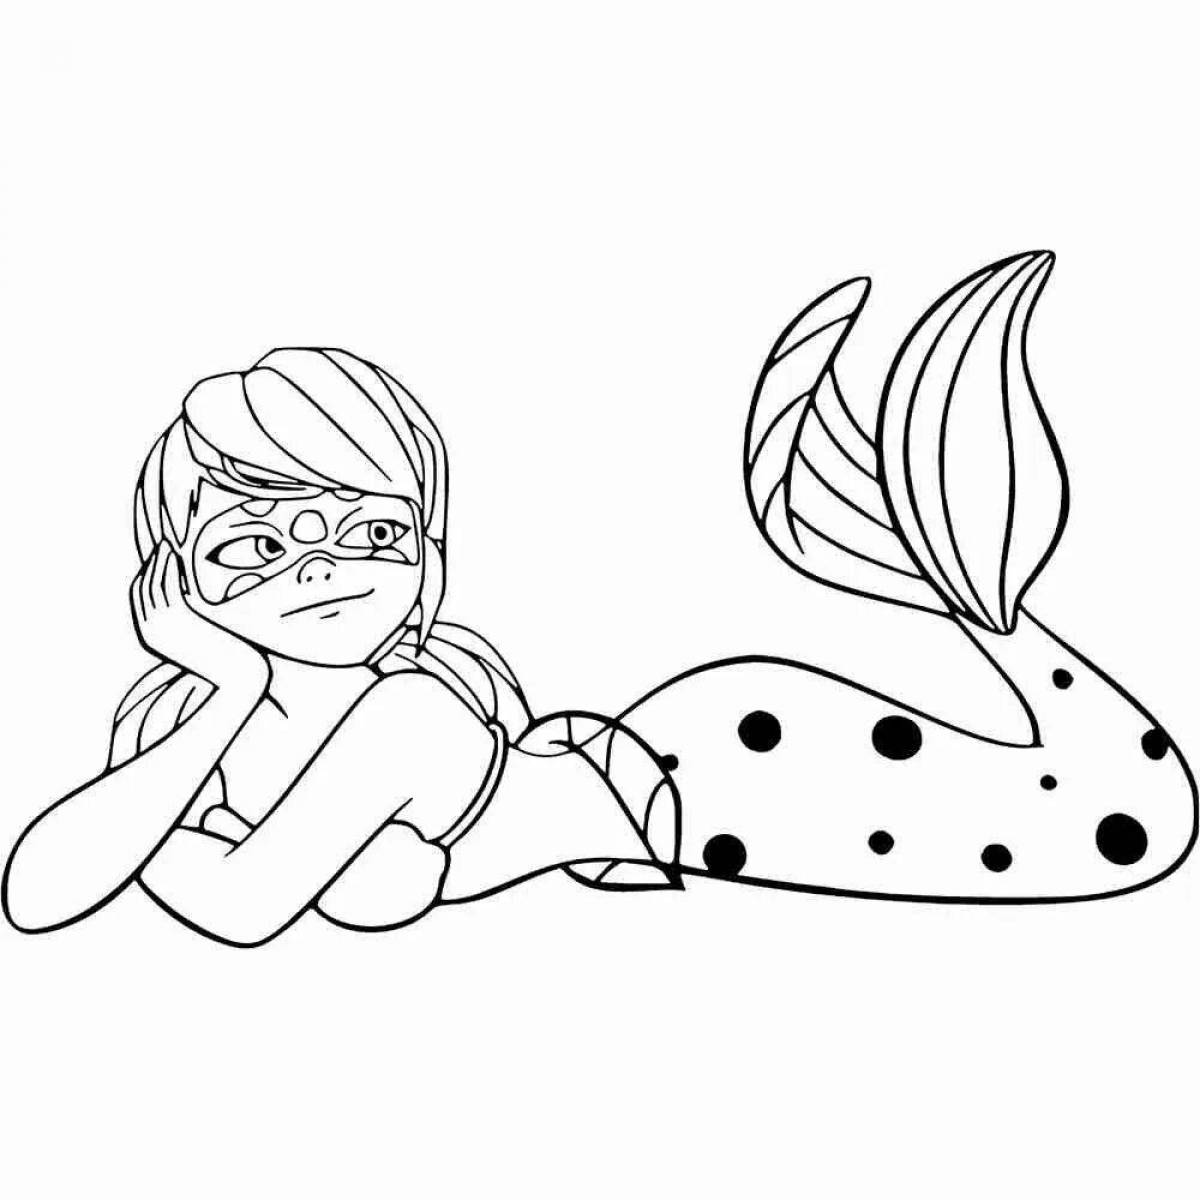 Adorable ladybug and super cat coloring book